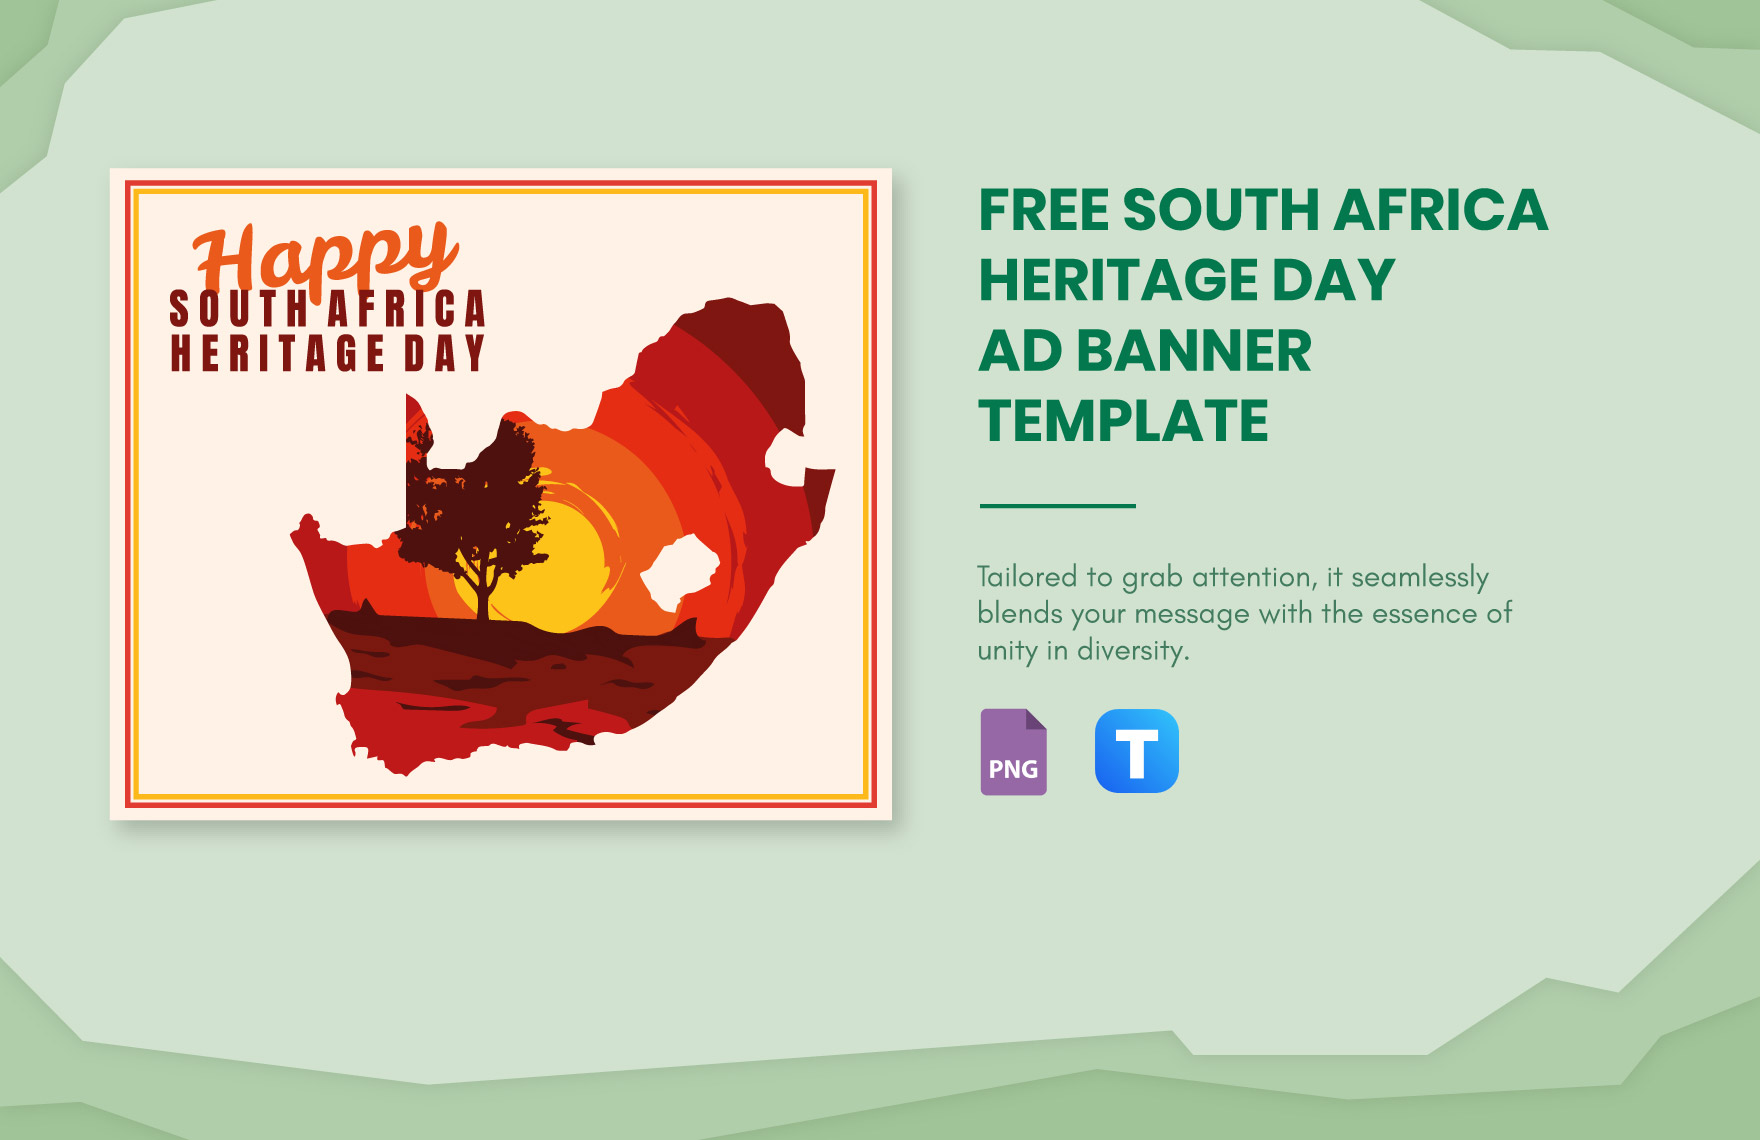 Free South Africa Heritage Day Ad Banner Template in PNG